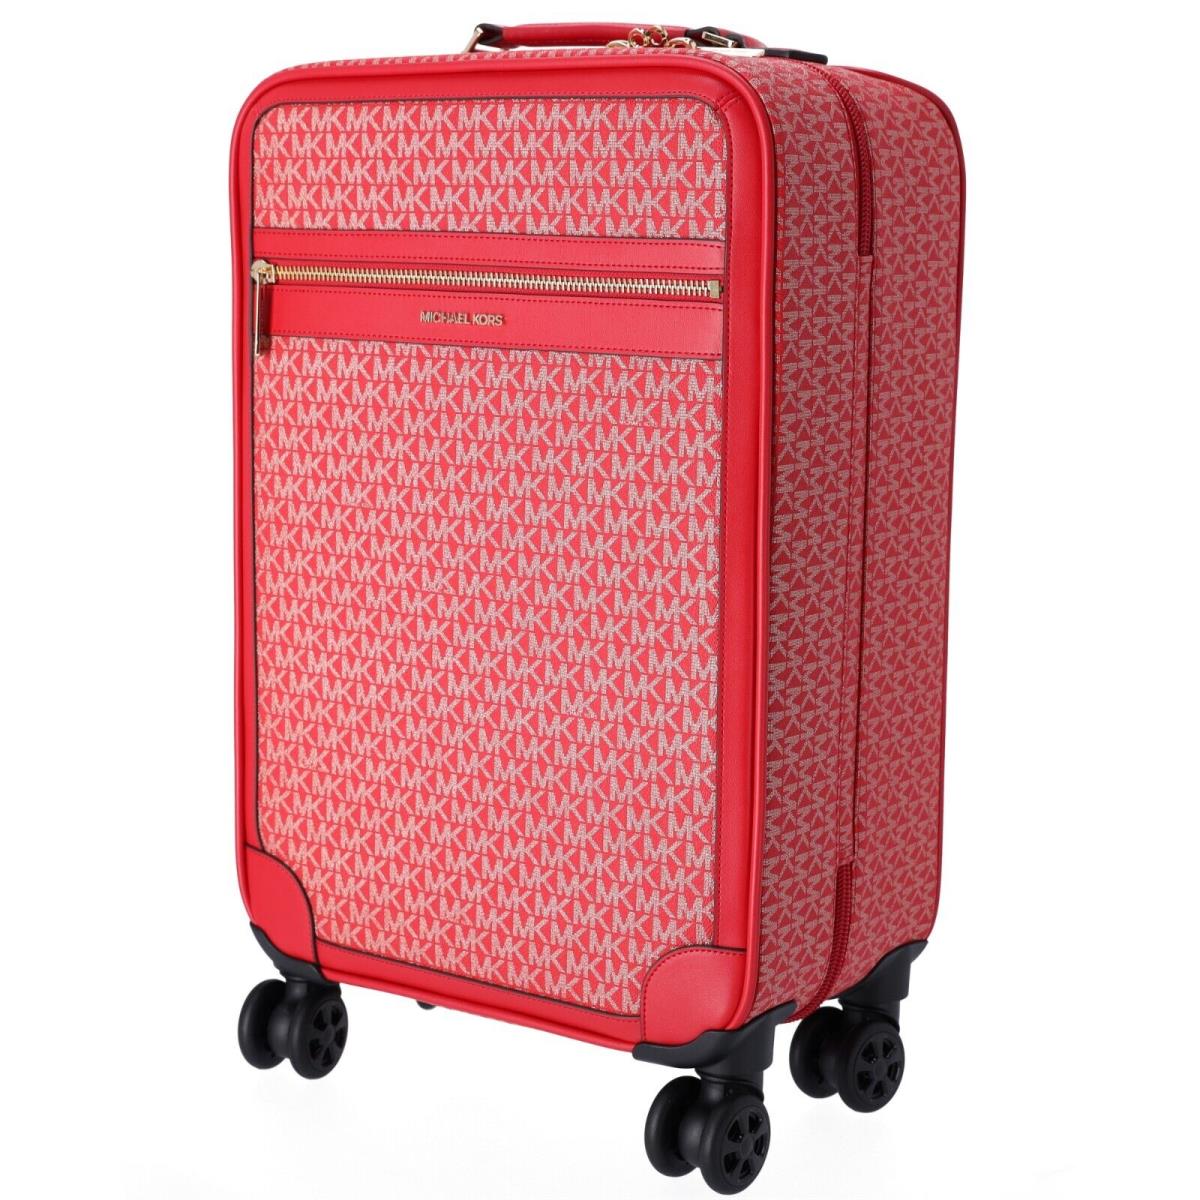 Michael Kors Jet Set Travel Trolley Carry-on Suitcase MK Signature Bright Red